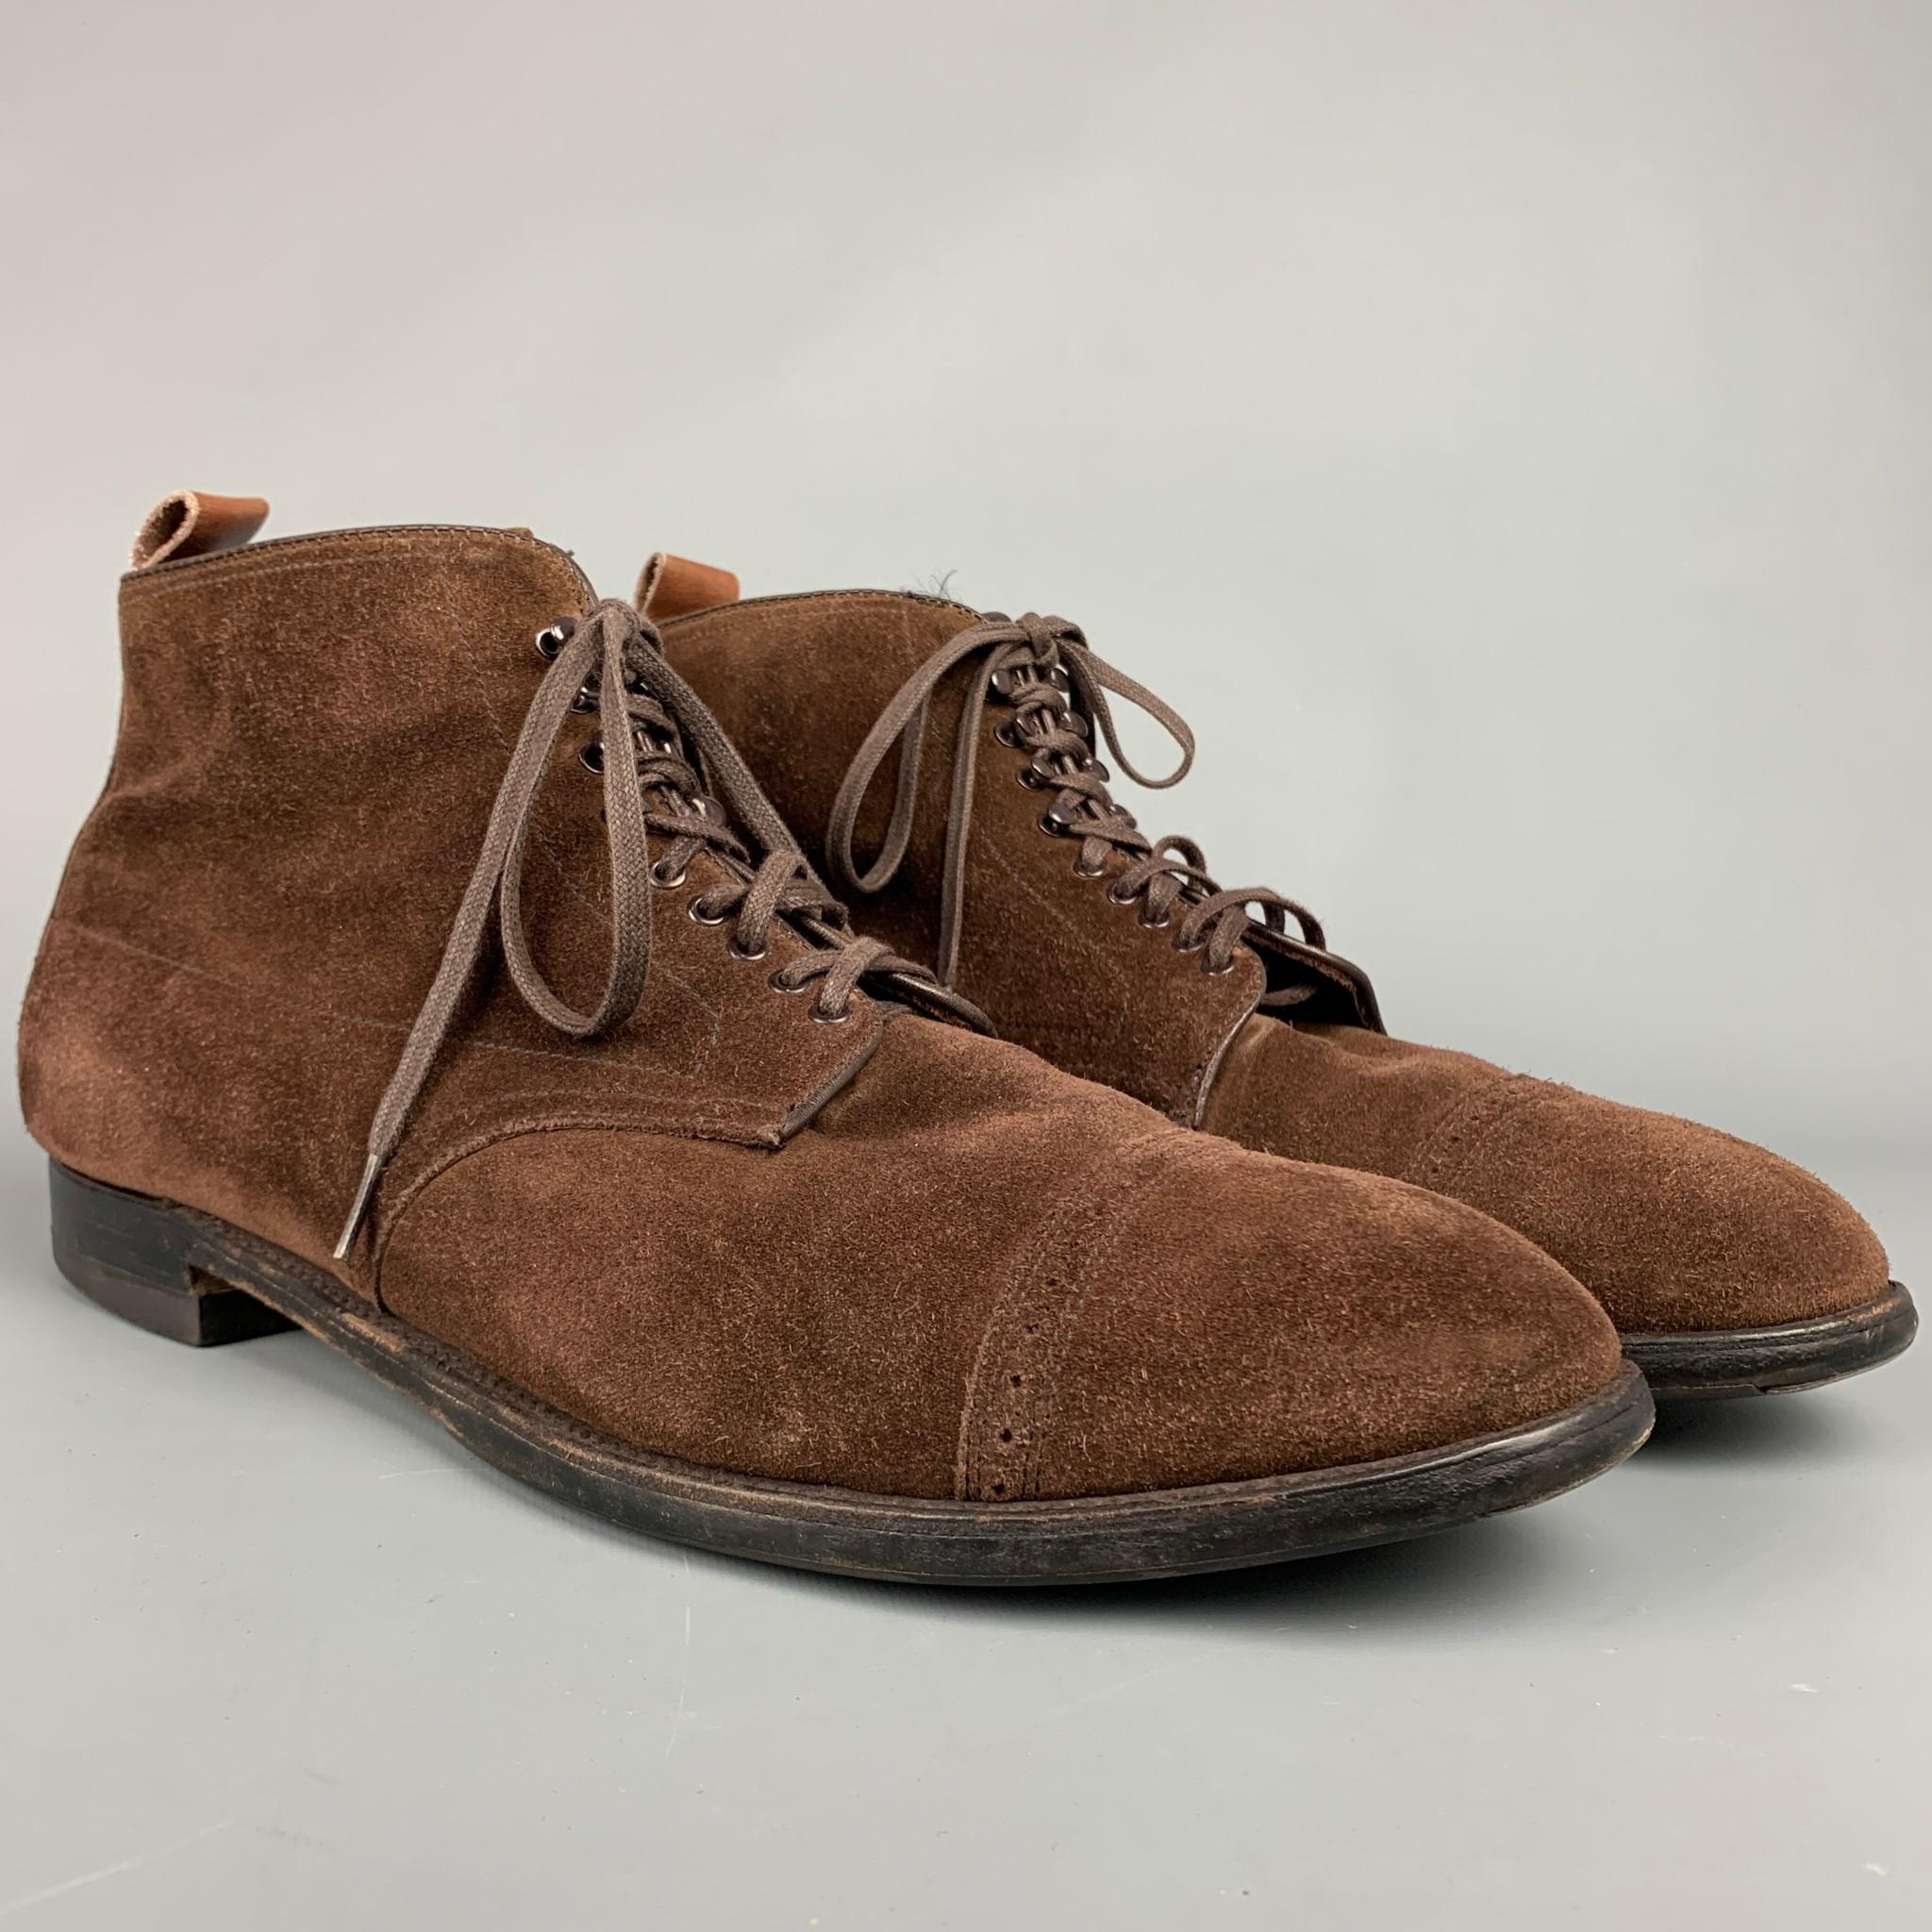 ALDEN boots comes in a brown suede leather featuring a cap toe, wooden sole, and a lace up closure. Comes with box, but not original. Made in England.

Very Good Pre-Owned Condition.
Marked: 15 / 4196

Measurements:

Length: 13.5 in.
Width: 4.5